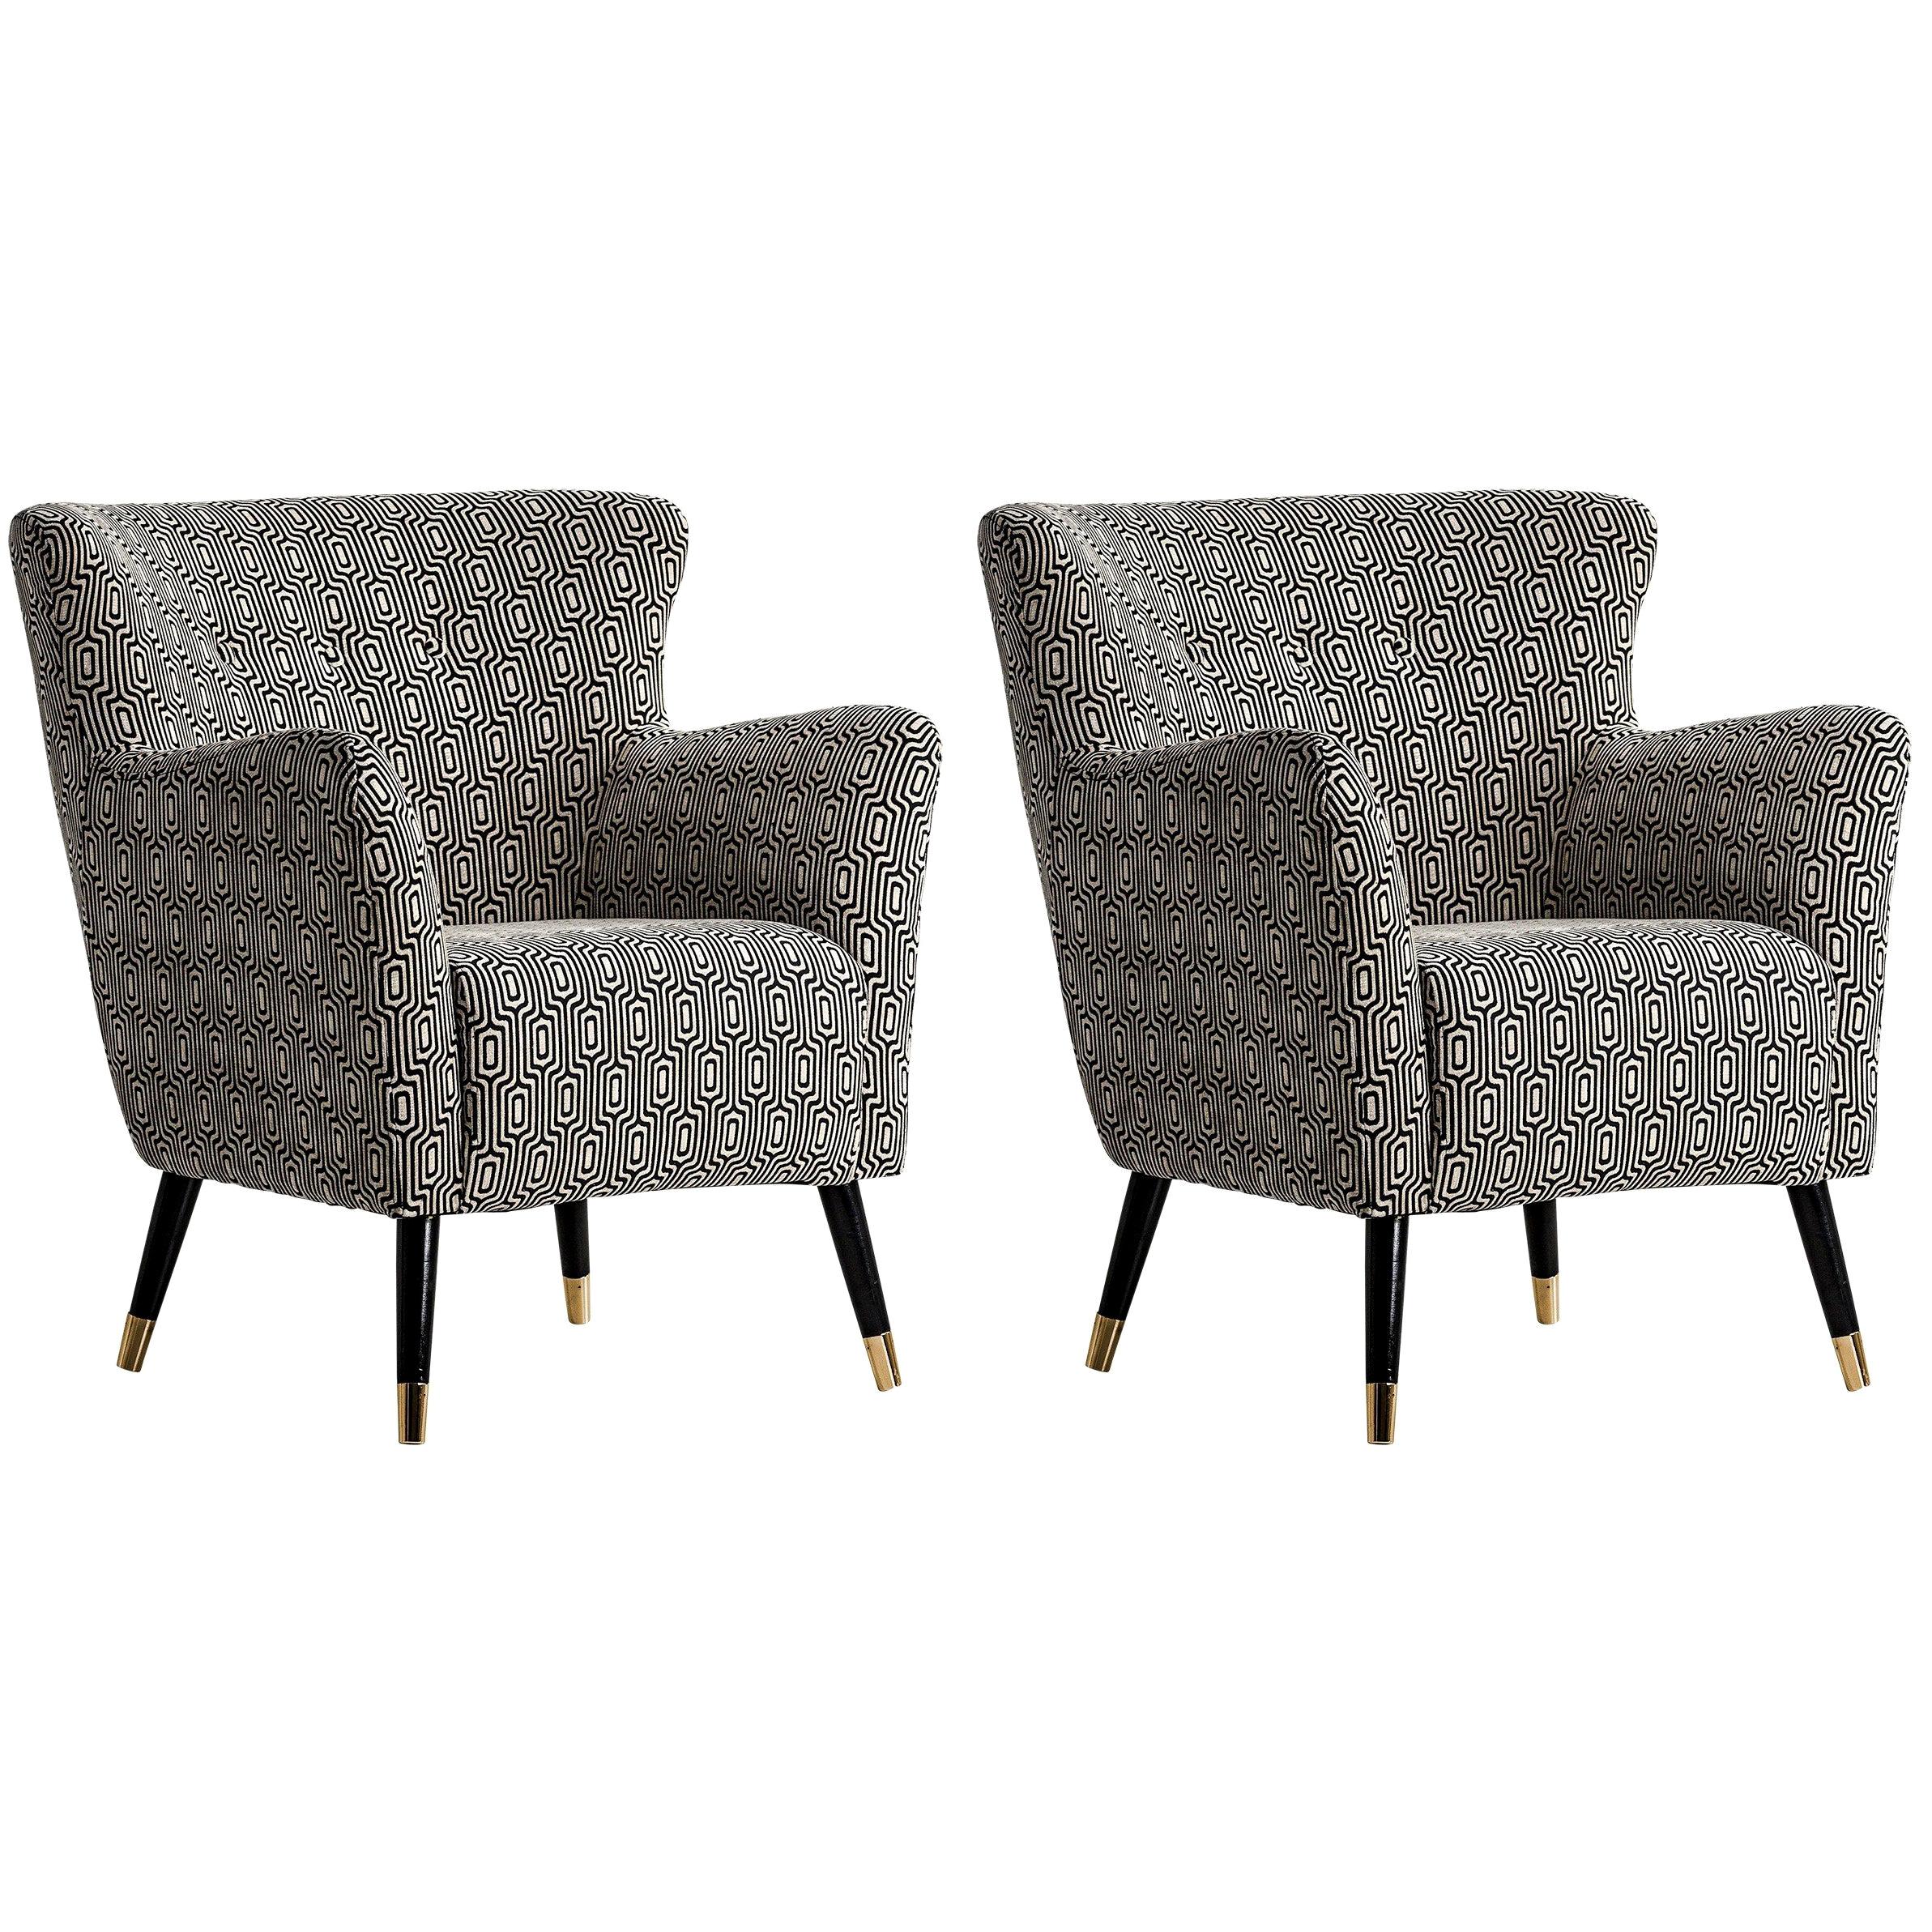 Italian Design Style Black and White Fabric Pair of Armchairs For Sale